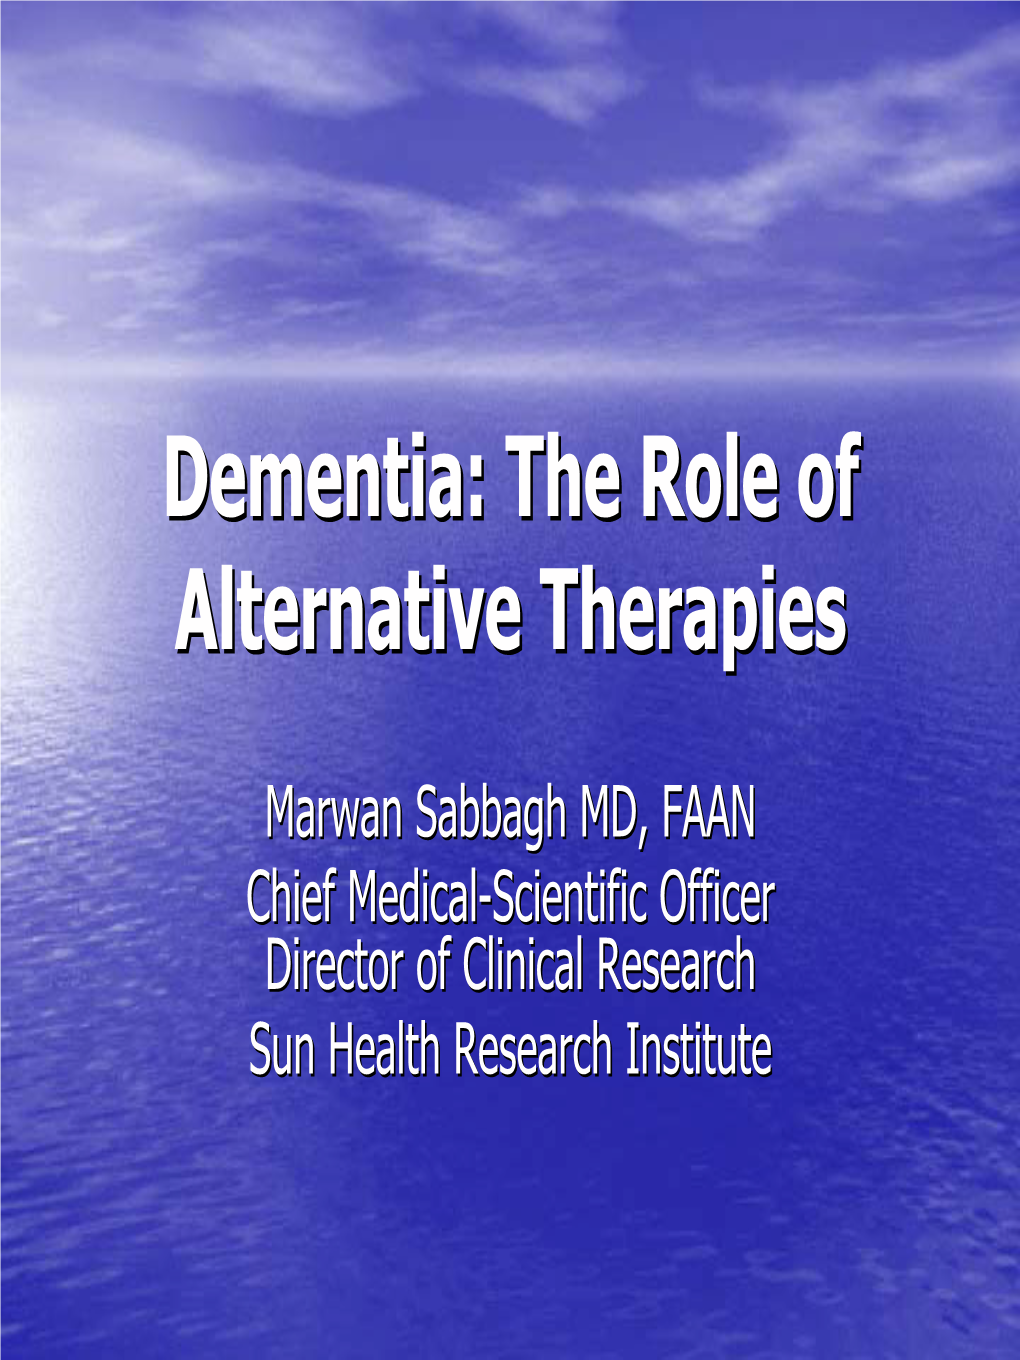 Dementia: the Role of Alternative Therapies